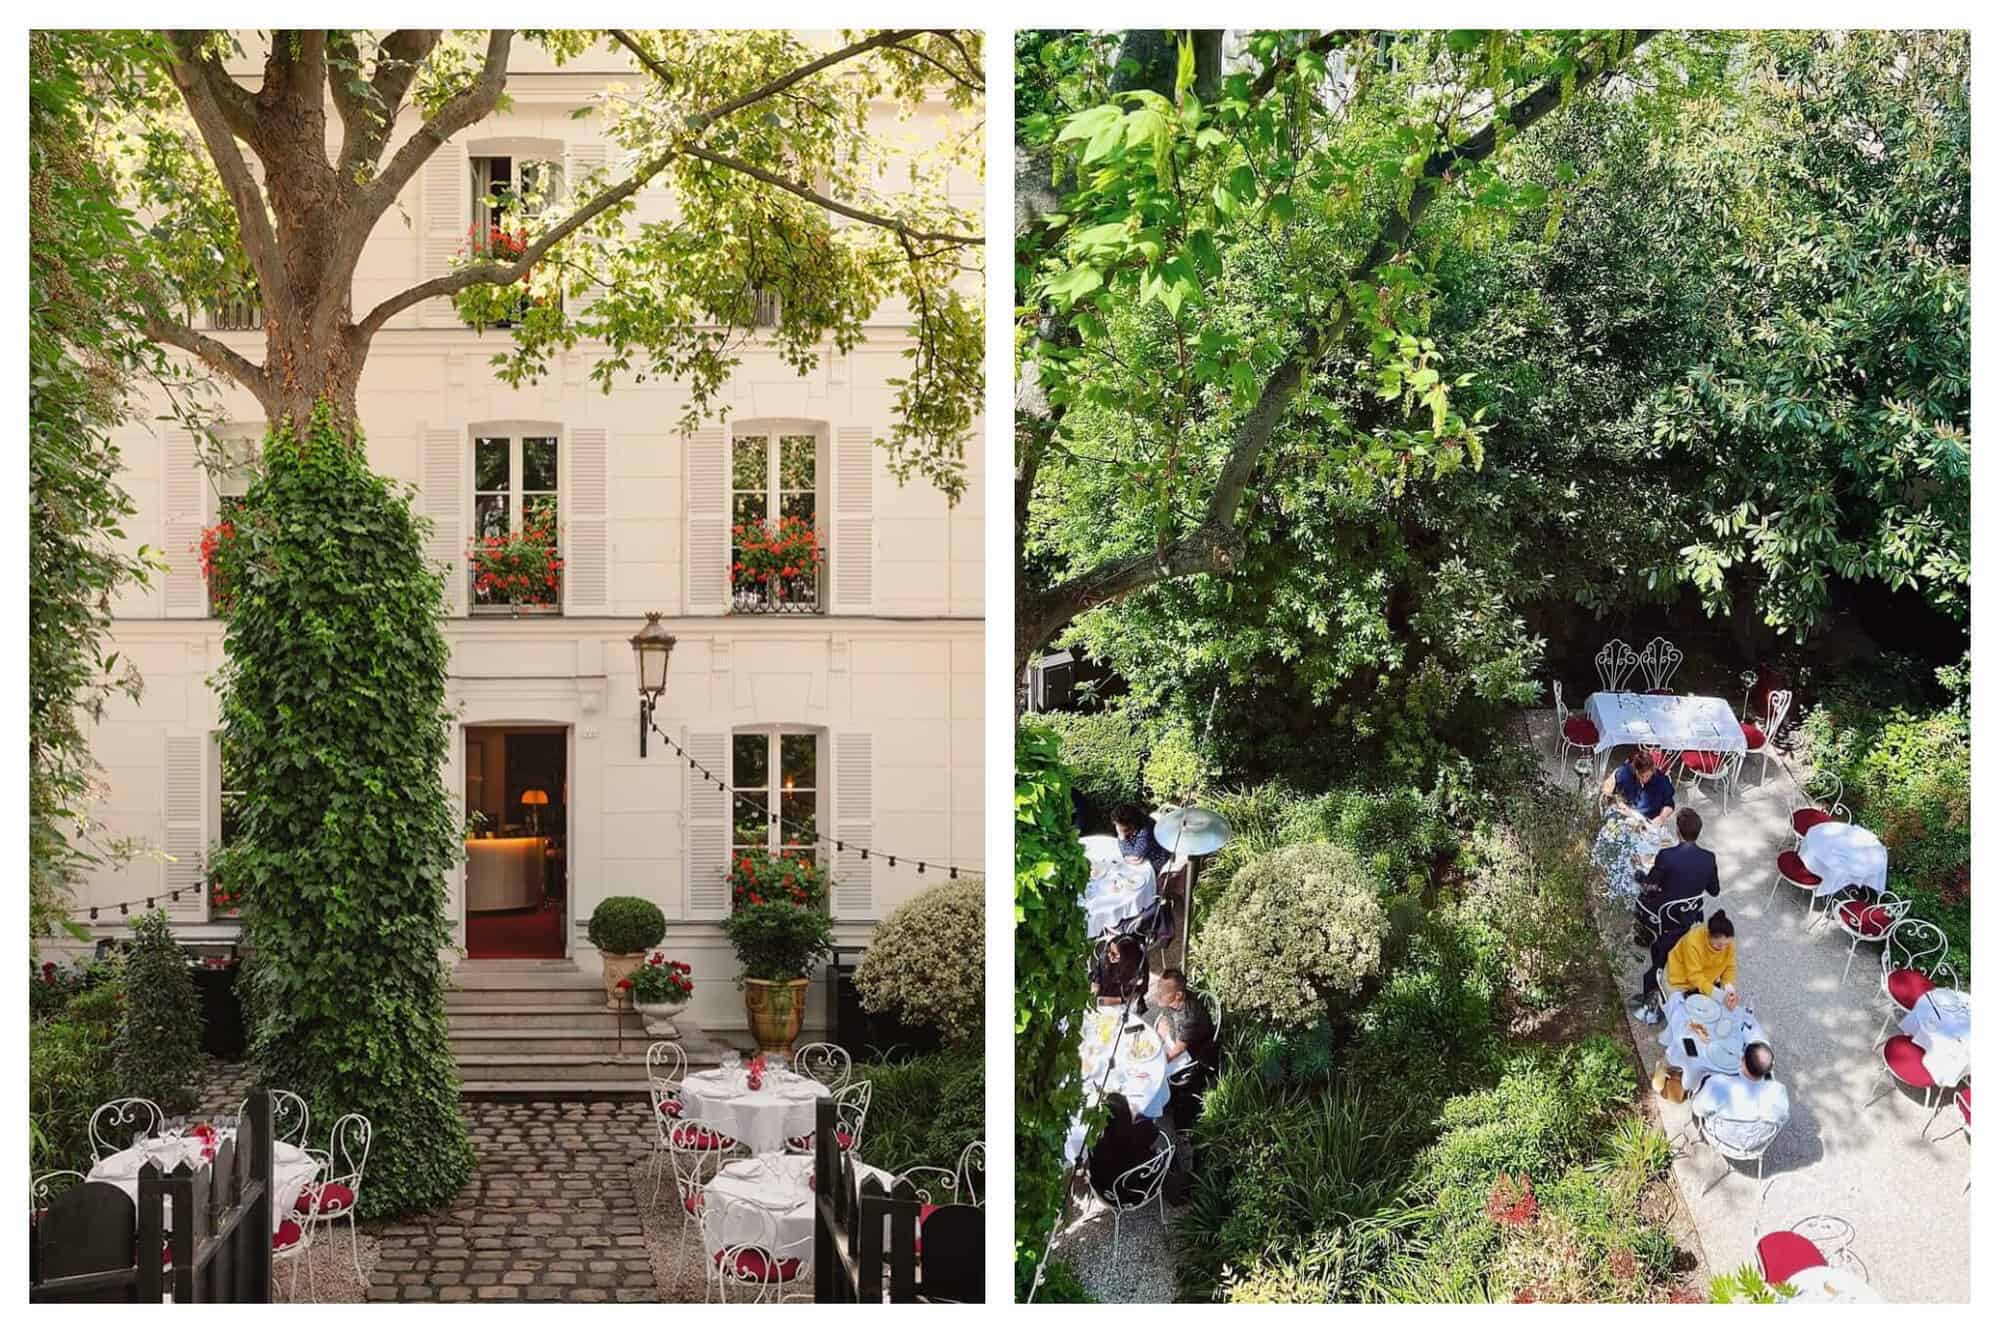 The elegant brick facade of Hôtel Particulier Montmartre with string lights hanging over the terrace. The lush garden with pertty garden furniture at lunch service.